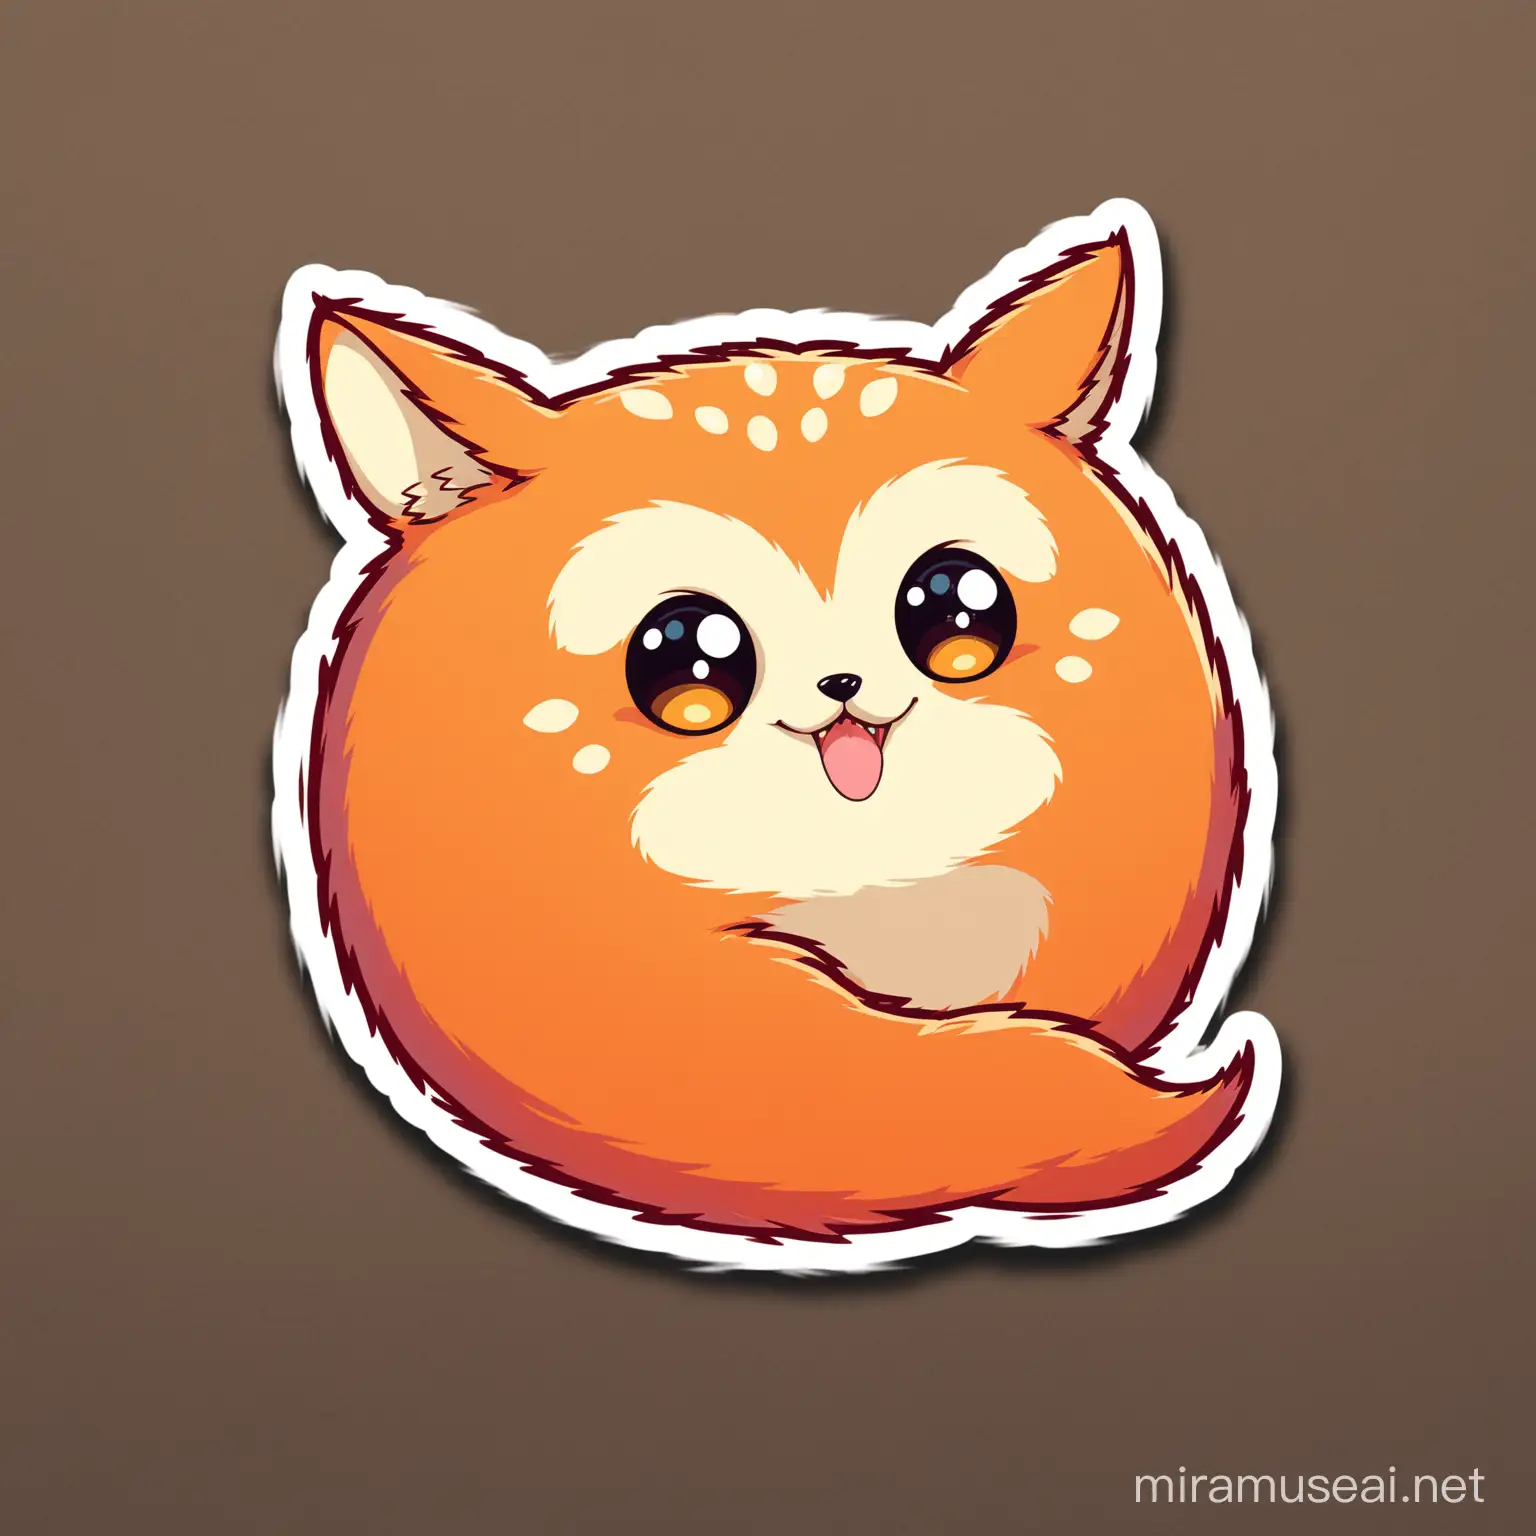 Whimsical Animal Sticker Designs for CritterCraftStickers